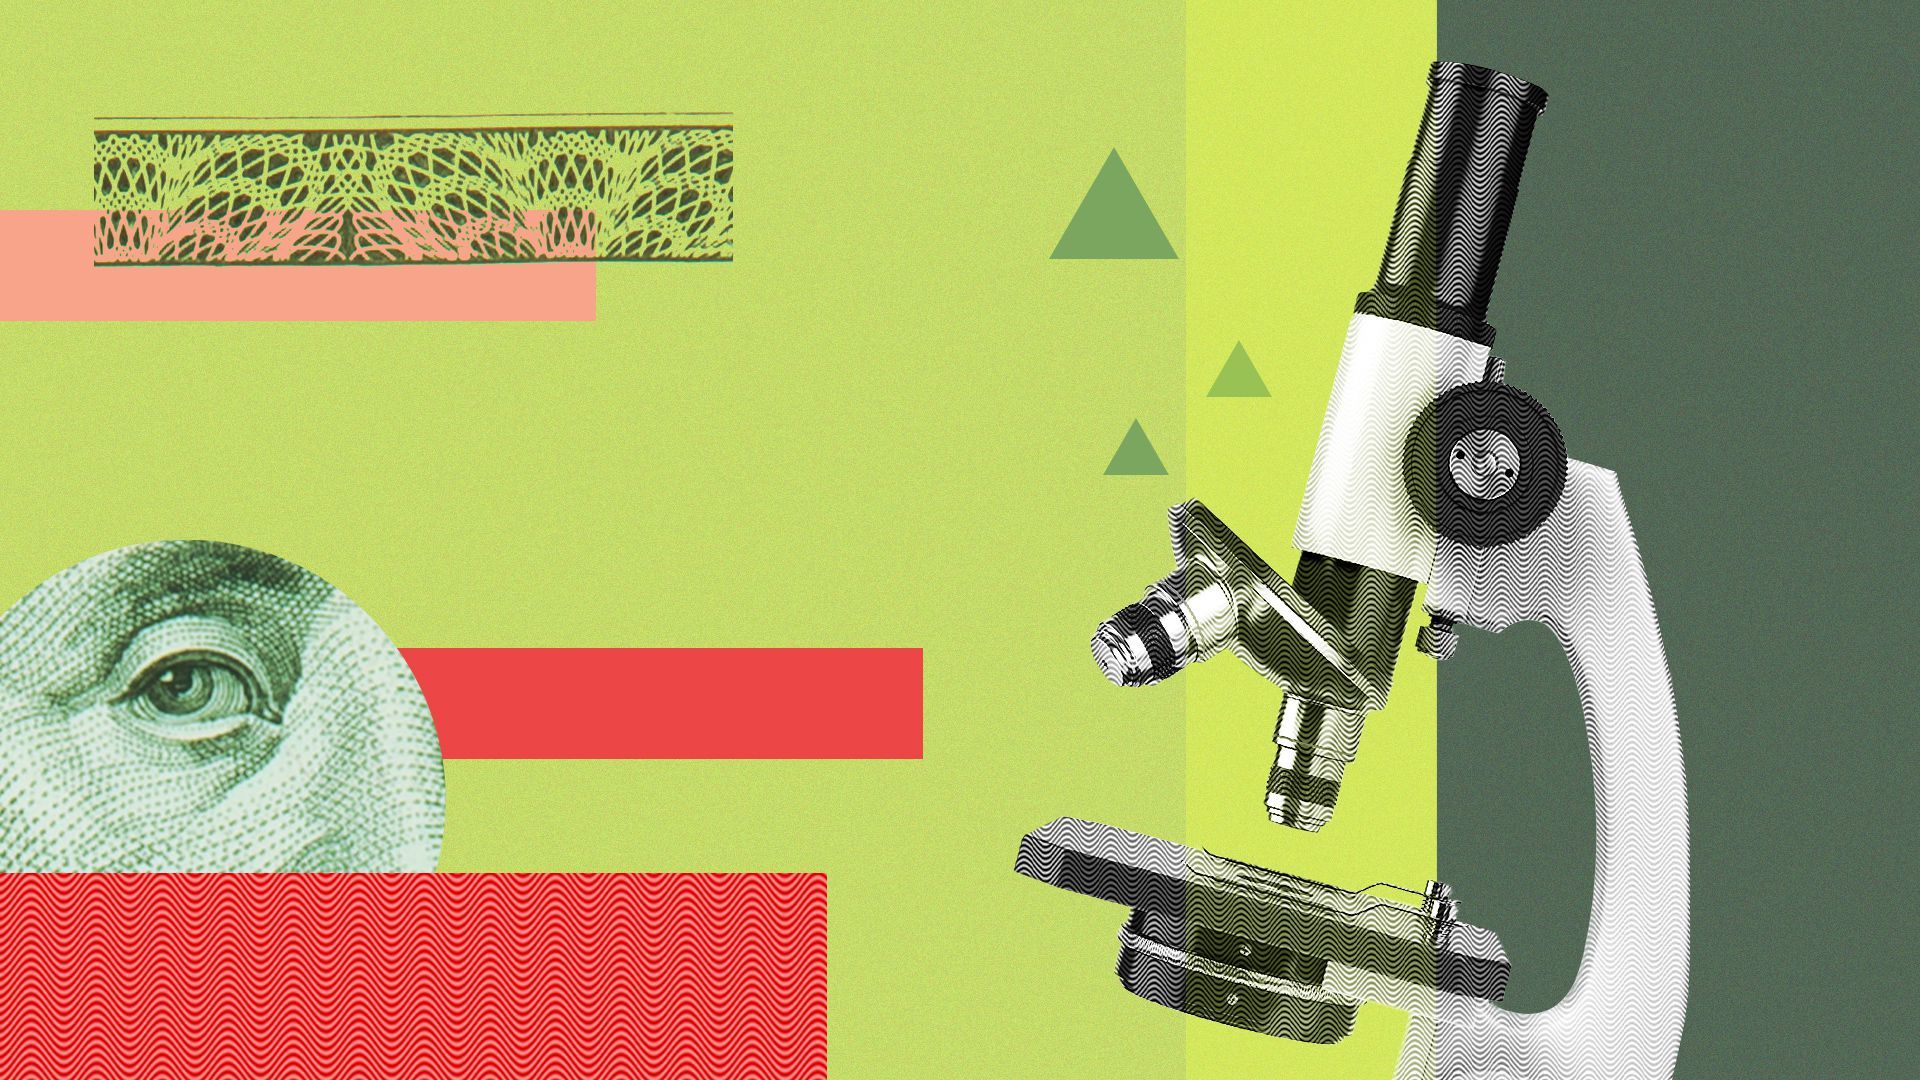 Illustration of a microscope with shapes and dollar elements.